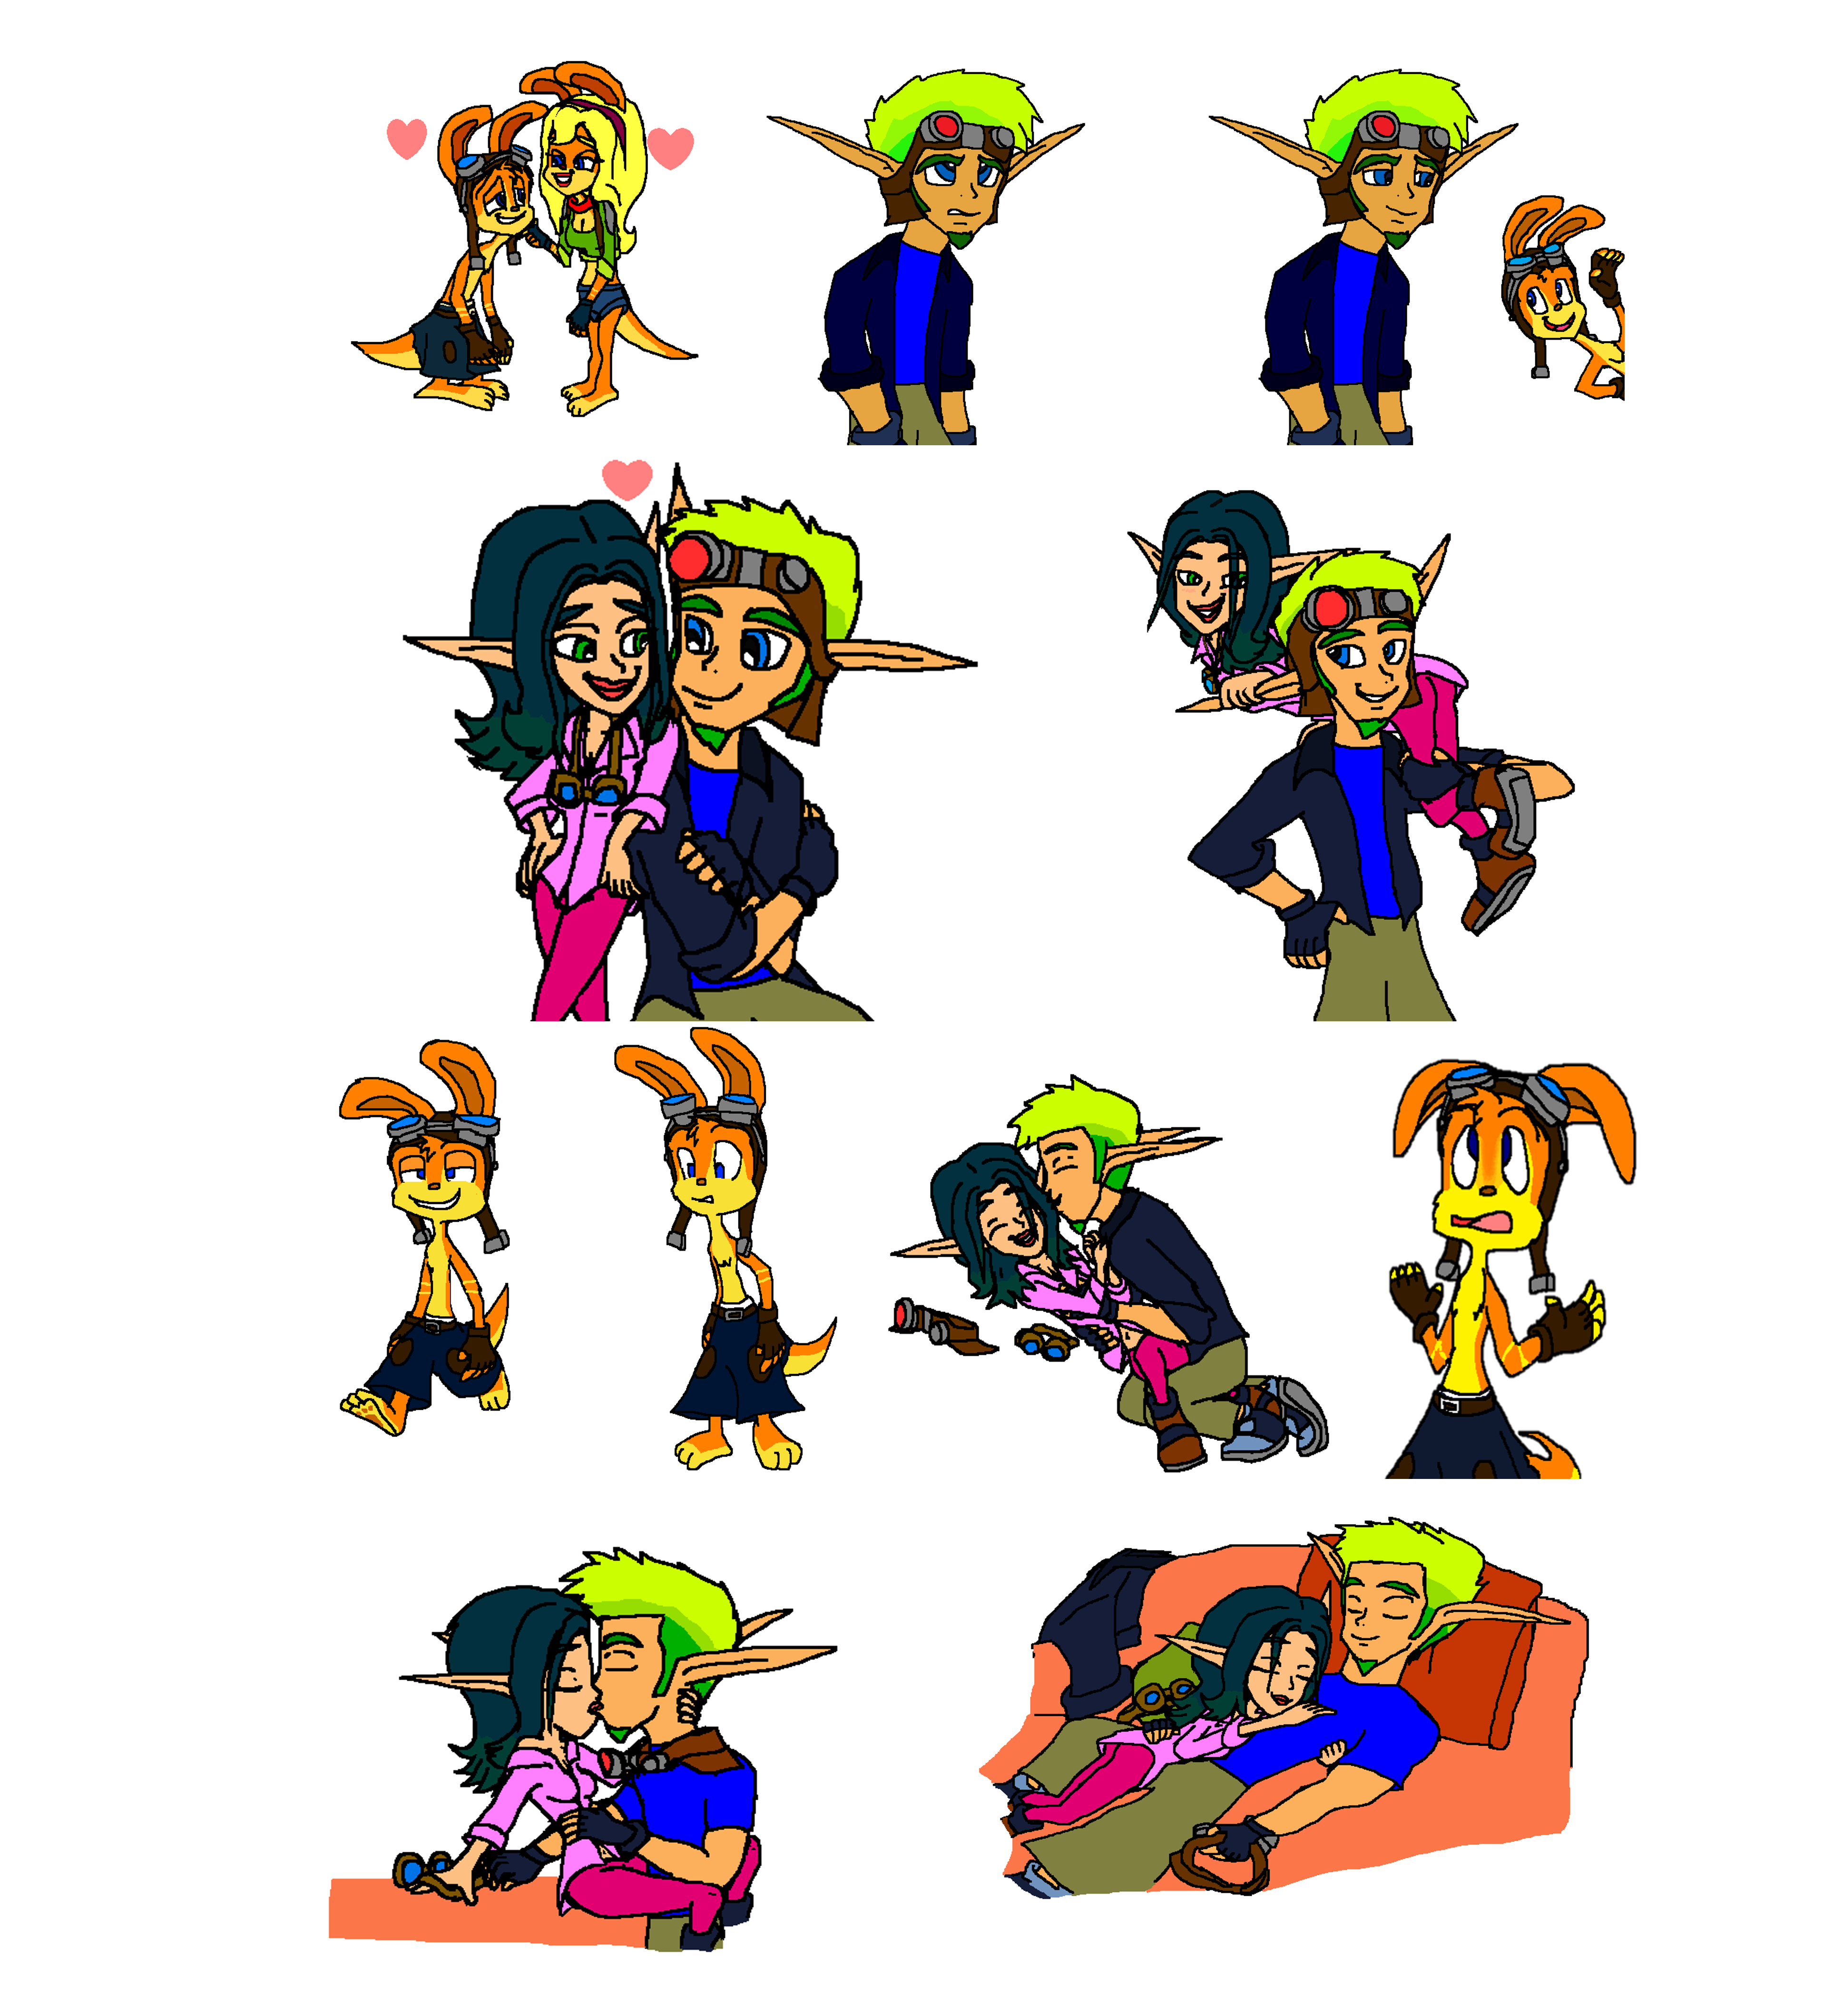 Jak and Daxter (Keira and Tess) Love and Distrub